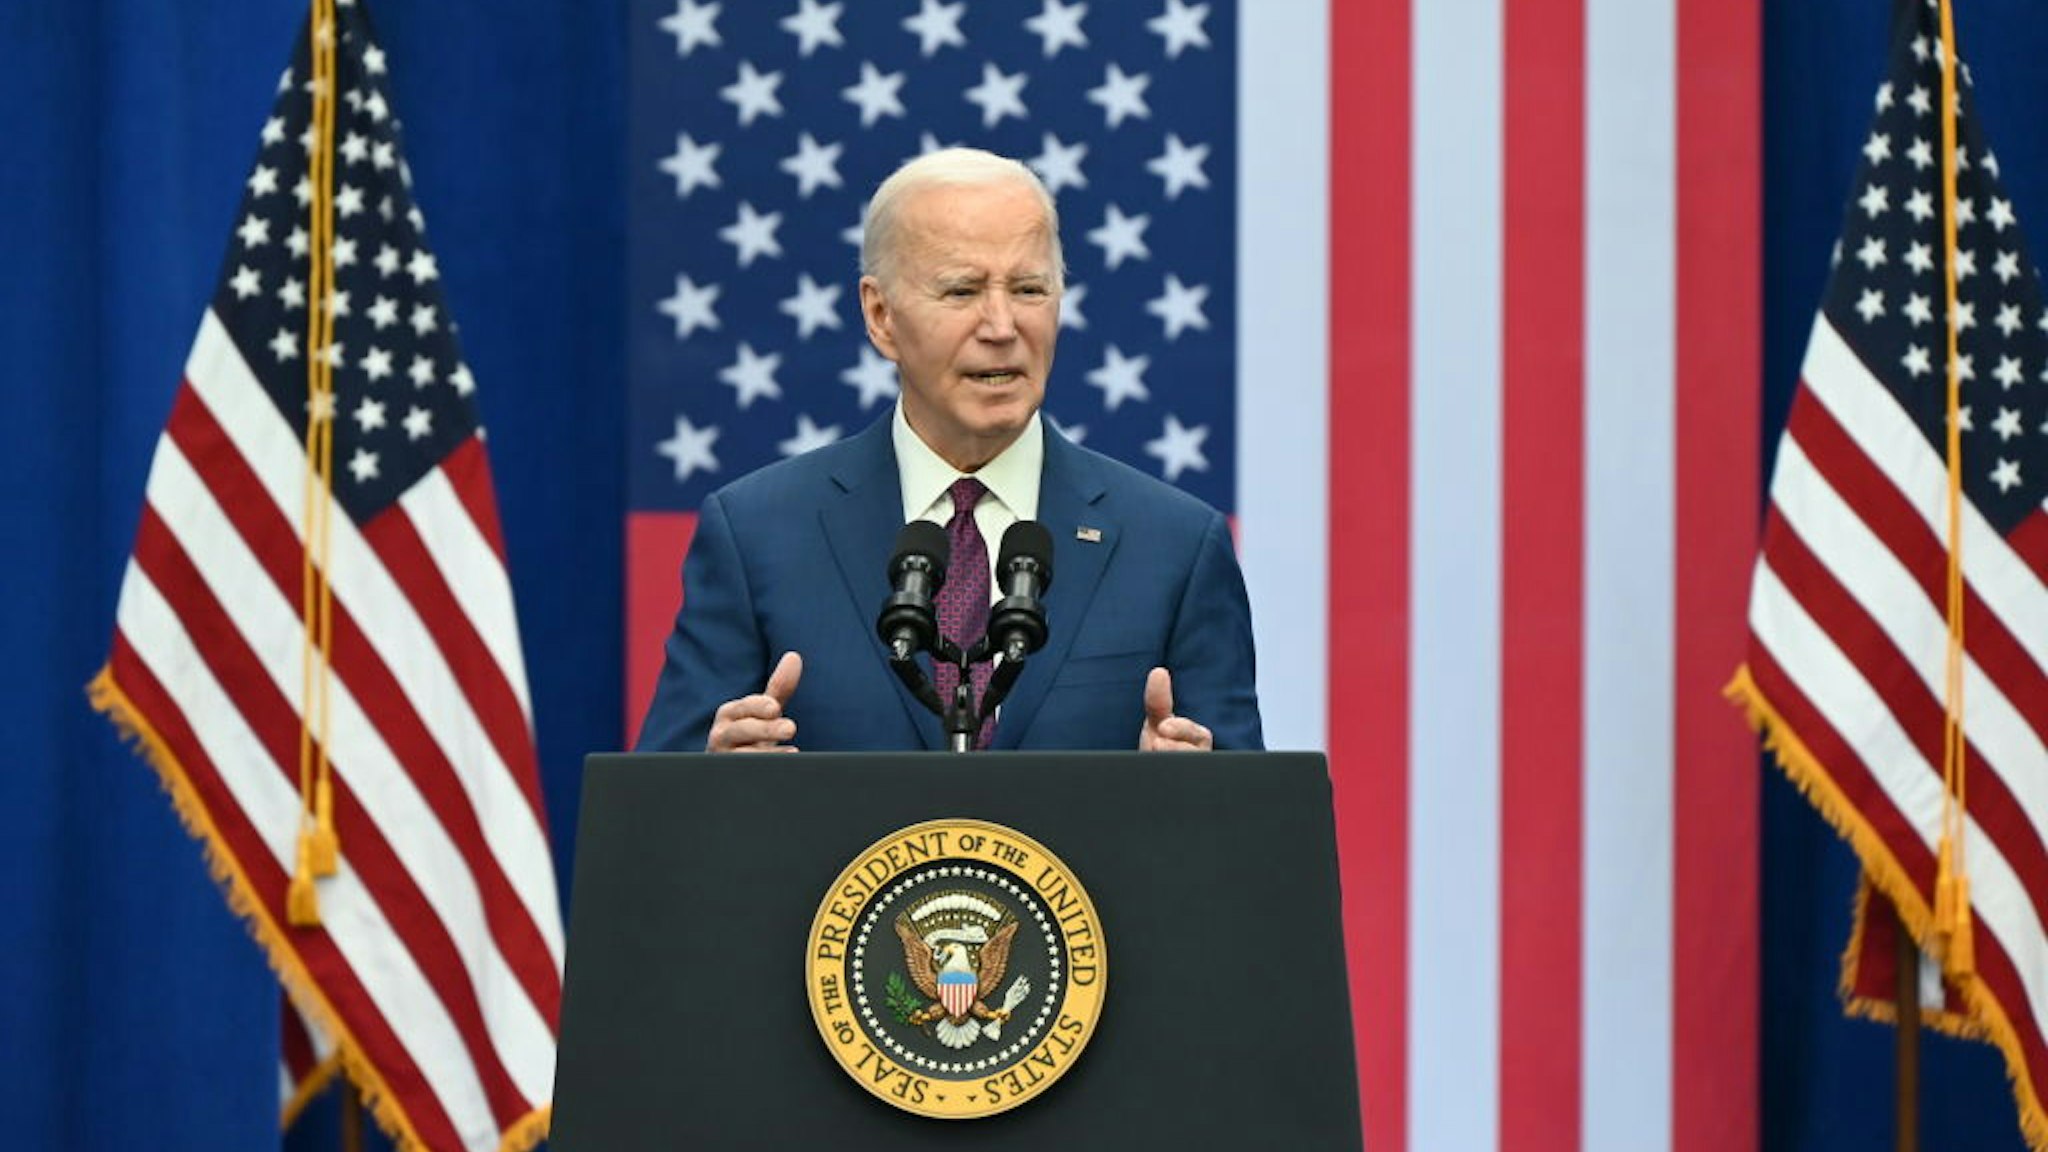 GOFFSTOWN, NEW HAMPSHIRE, UNITED STATES - MARCH 11: President of the United States Joe Biden delivers remarks on lowering costs for American families and delivers his vision in contrast to Former U.S. President Donald J. Trump at the YMCA Allard Center in Goffstown, New Hampshire, United States on March 11, 2024.